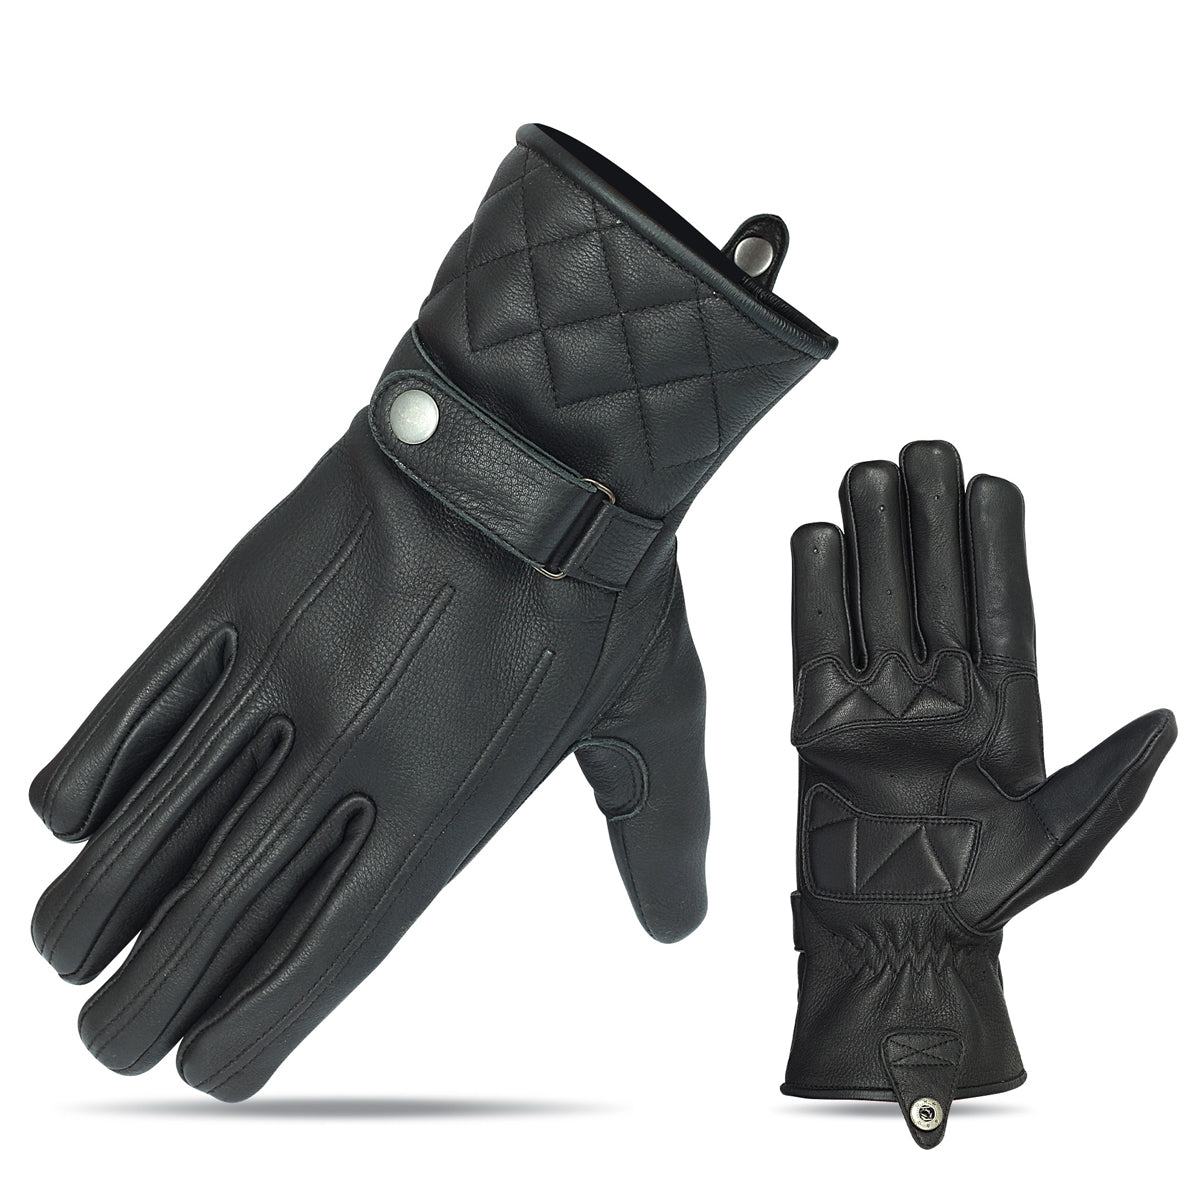 VL467 Premium Leather Driving Glove with Snap Cuff